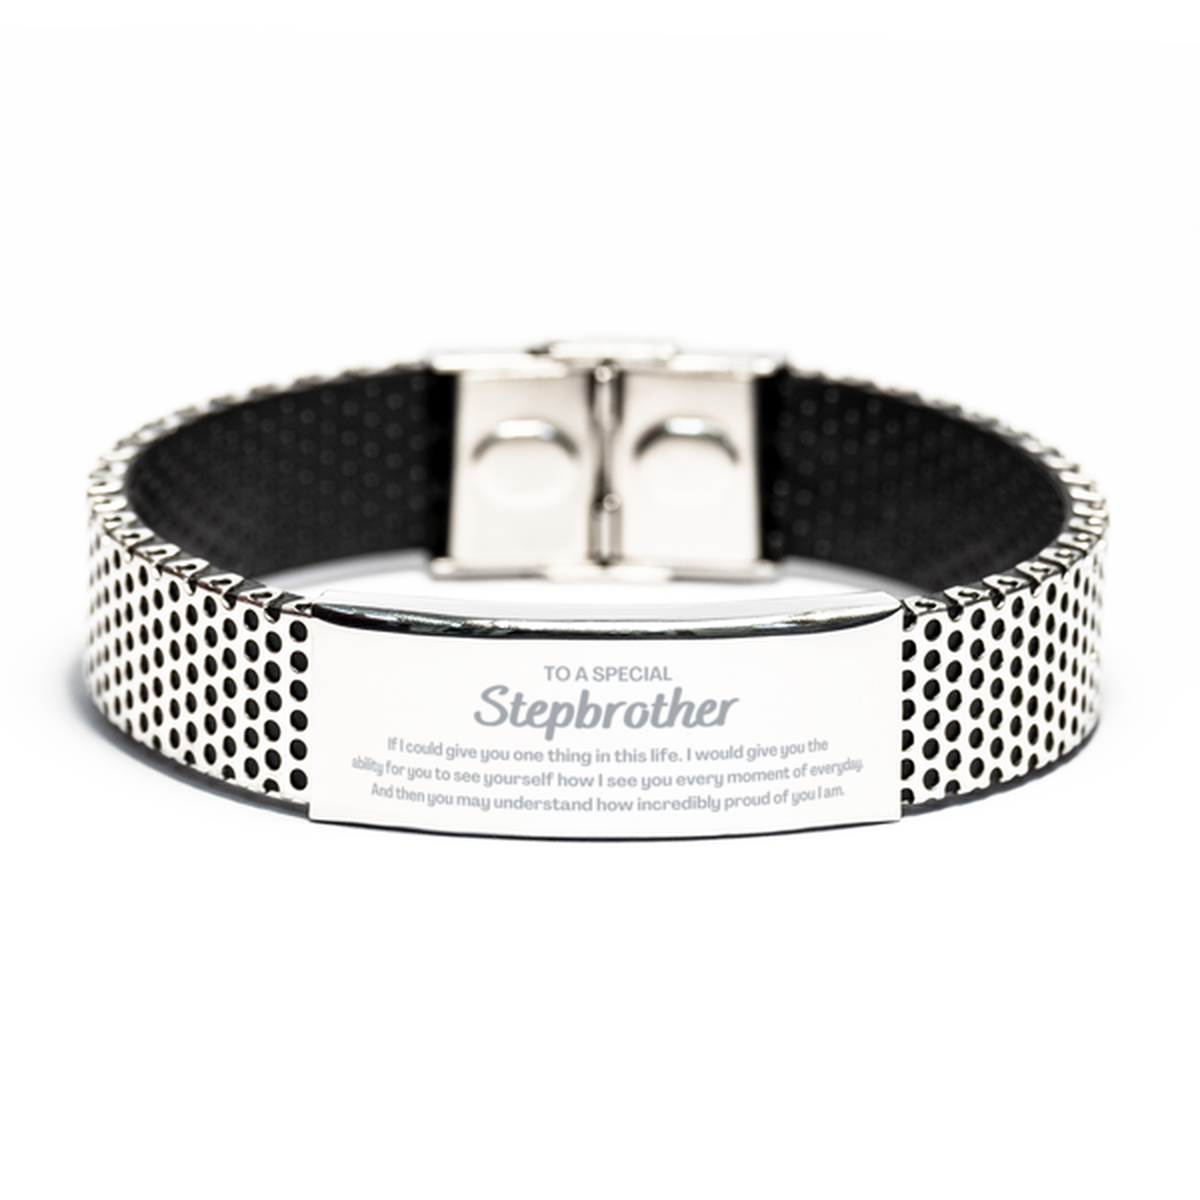 To My Stepbrother Stainless Steel Bracelet, Gifts For Stepbrother Engraved, Inspirational Gifts for Christmas Birthday, Epic Gifts for Stepbrother To A Special Stepbrother how incredibly proud of you I am